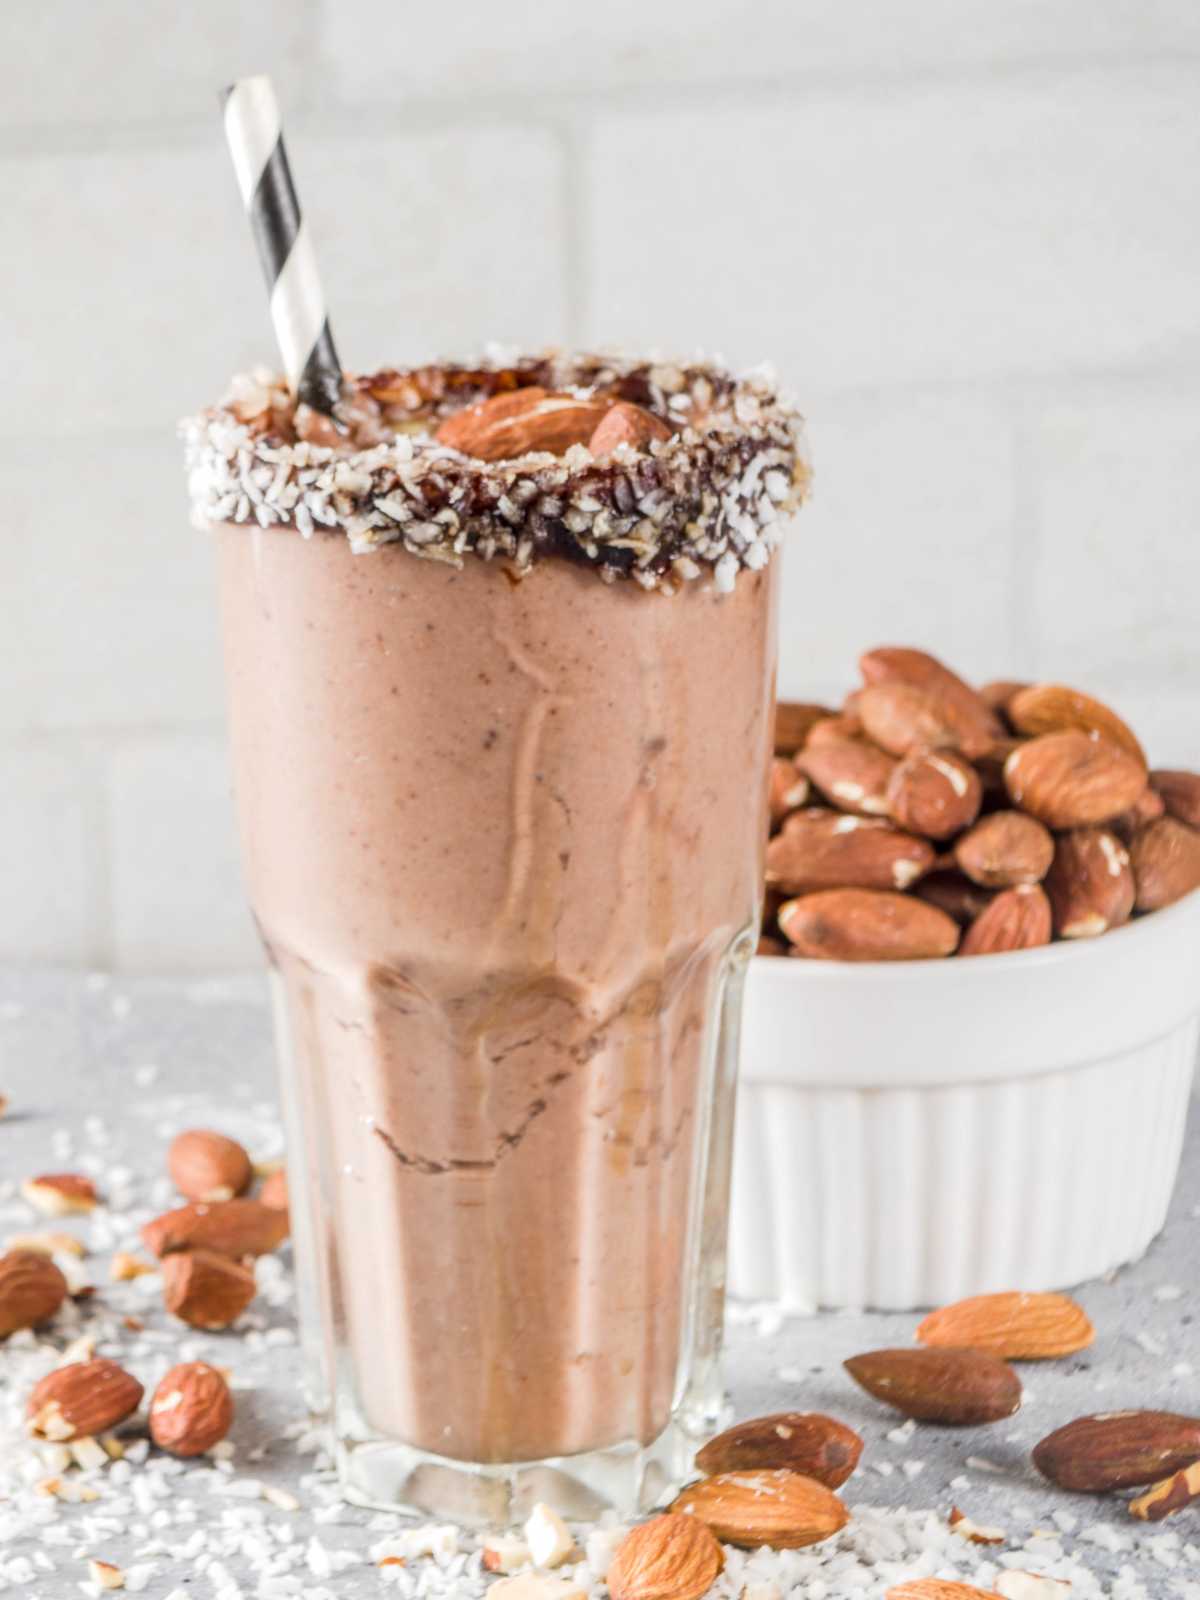 Almond joy smoothie in a glass with coconut chocolate dipped rim.